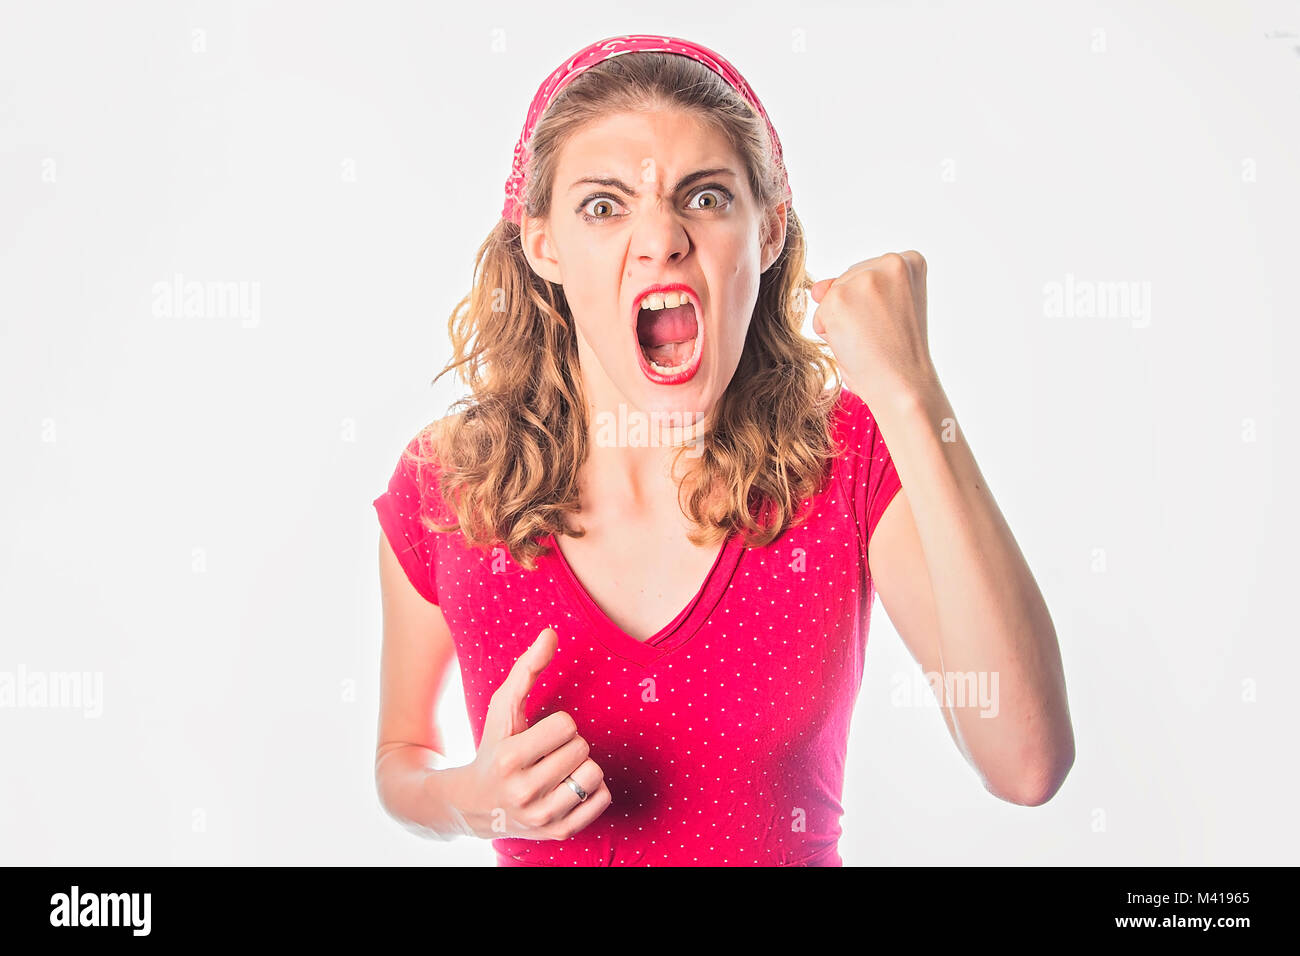 Angry young woman in red vintage dress Stock Photo